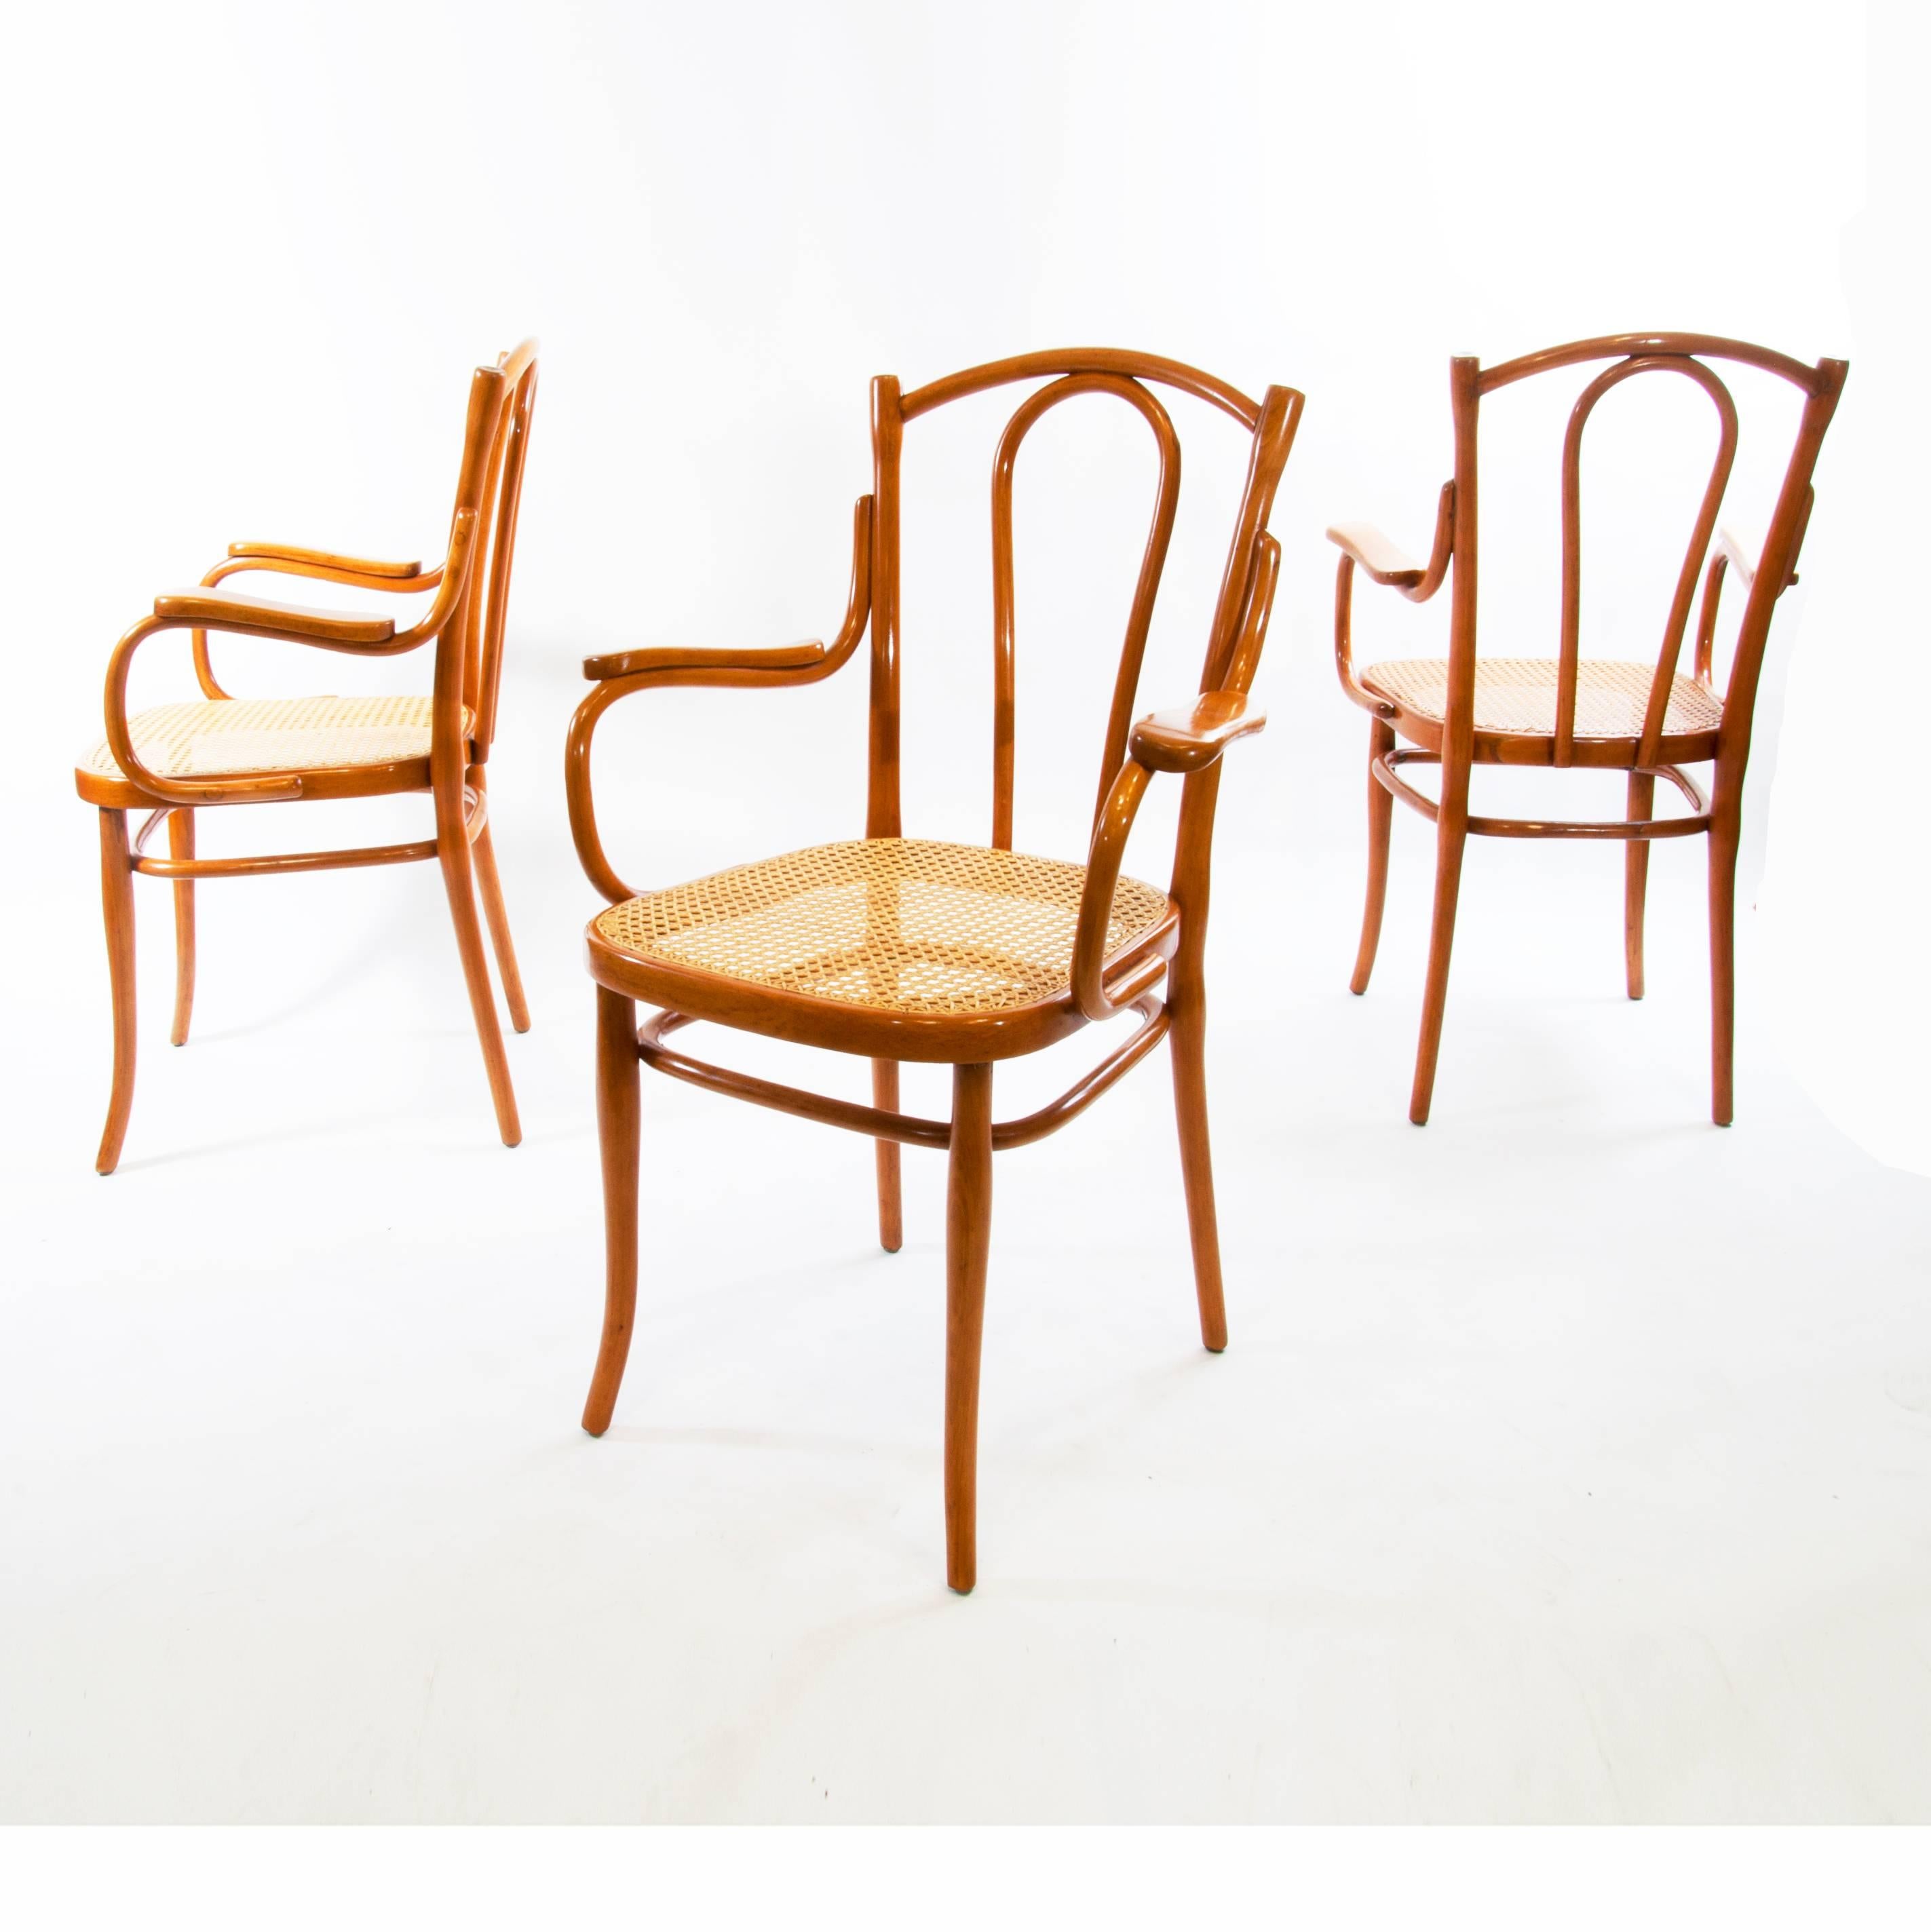 Antique Thonet bentwood armchair fauteuil No. 56 F designed 1885, manufactured 1925.
Very rare and antique Thonet chair, which was produced between 1910-1929 and was designed in 1885 by the Gebruder Thonet.

The company Thonet was founded by